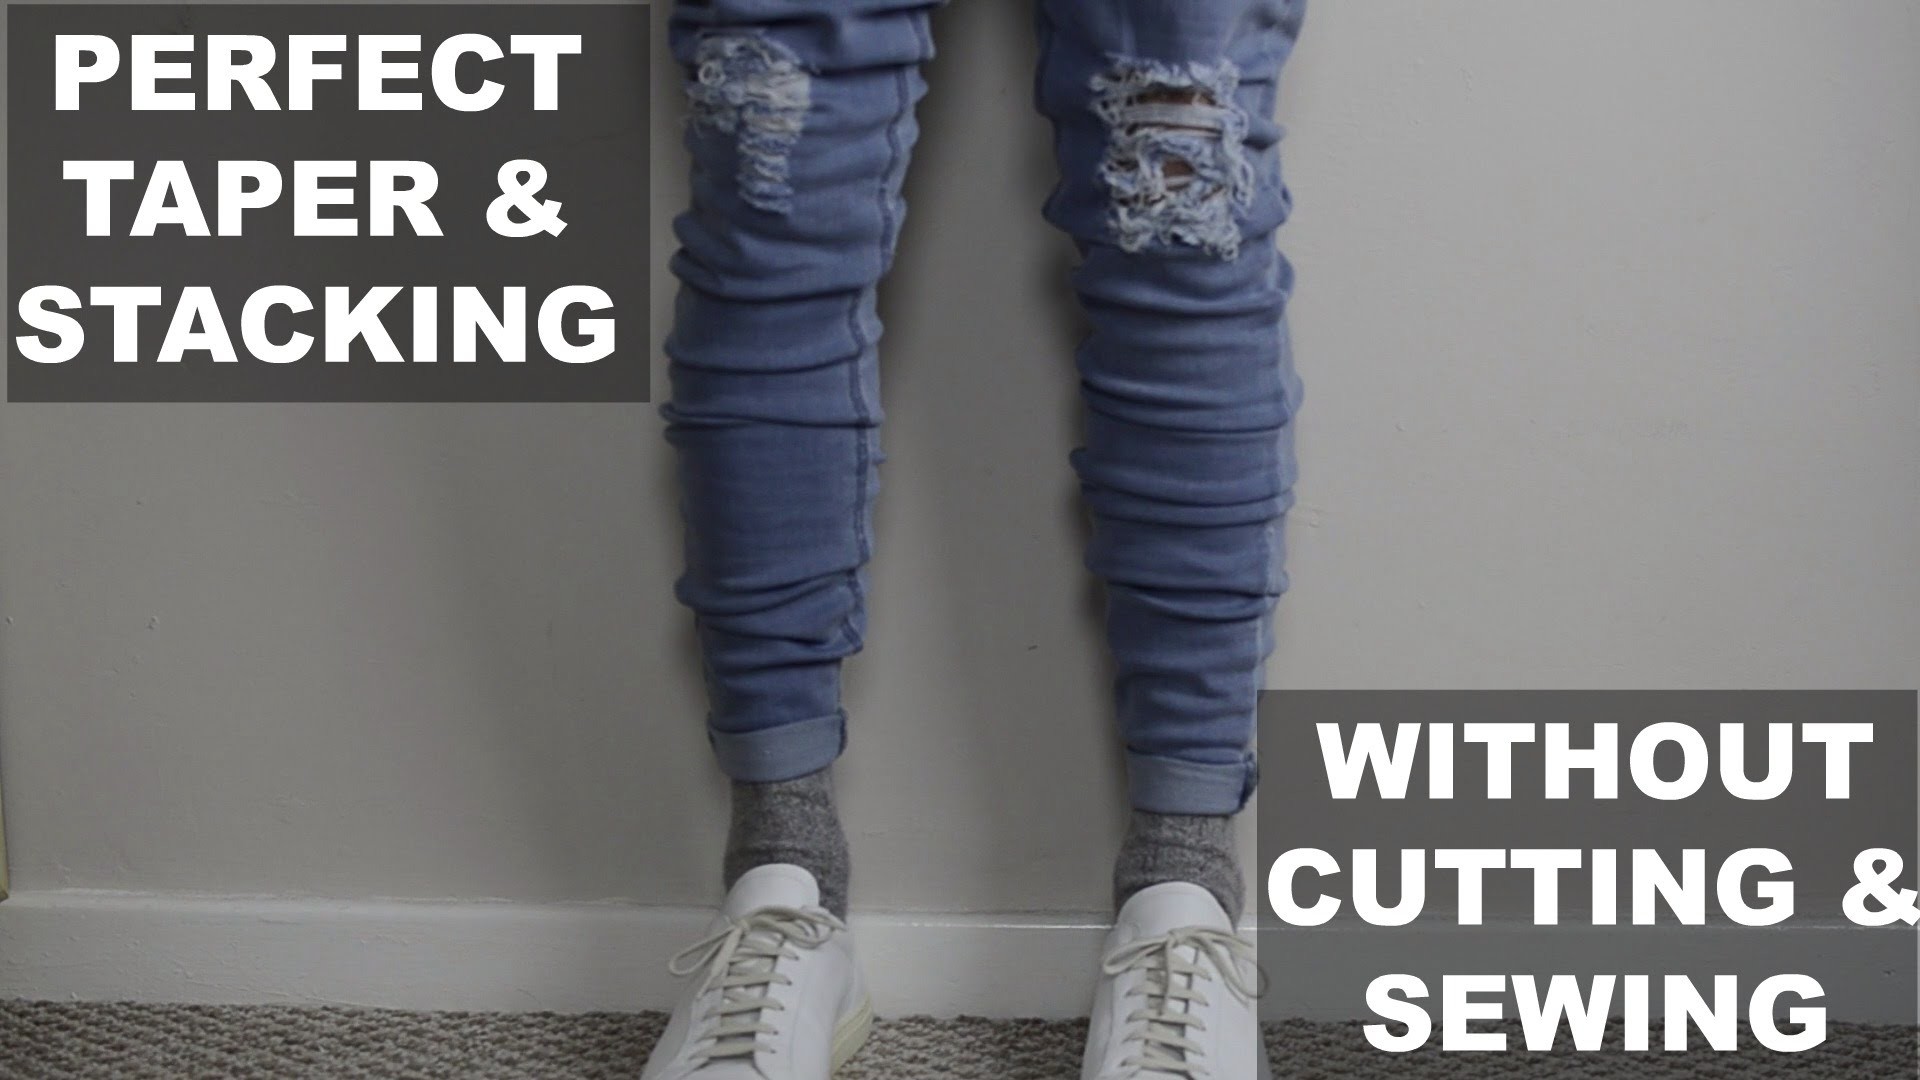 How I Taper & Stack Jeans Perfectly - No Cutting or Sewing - Easy Guide ...